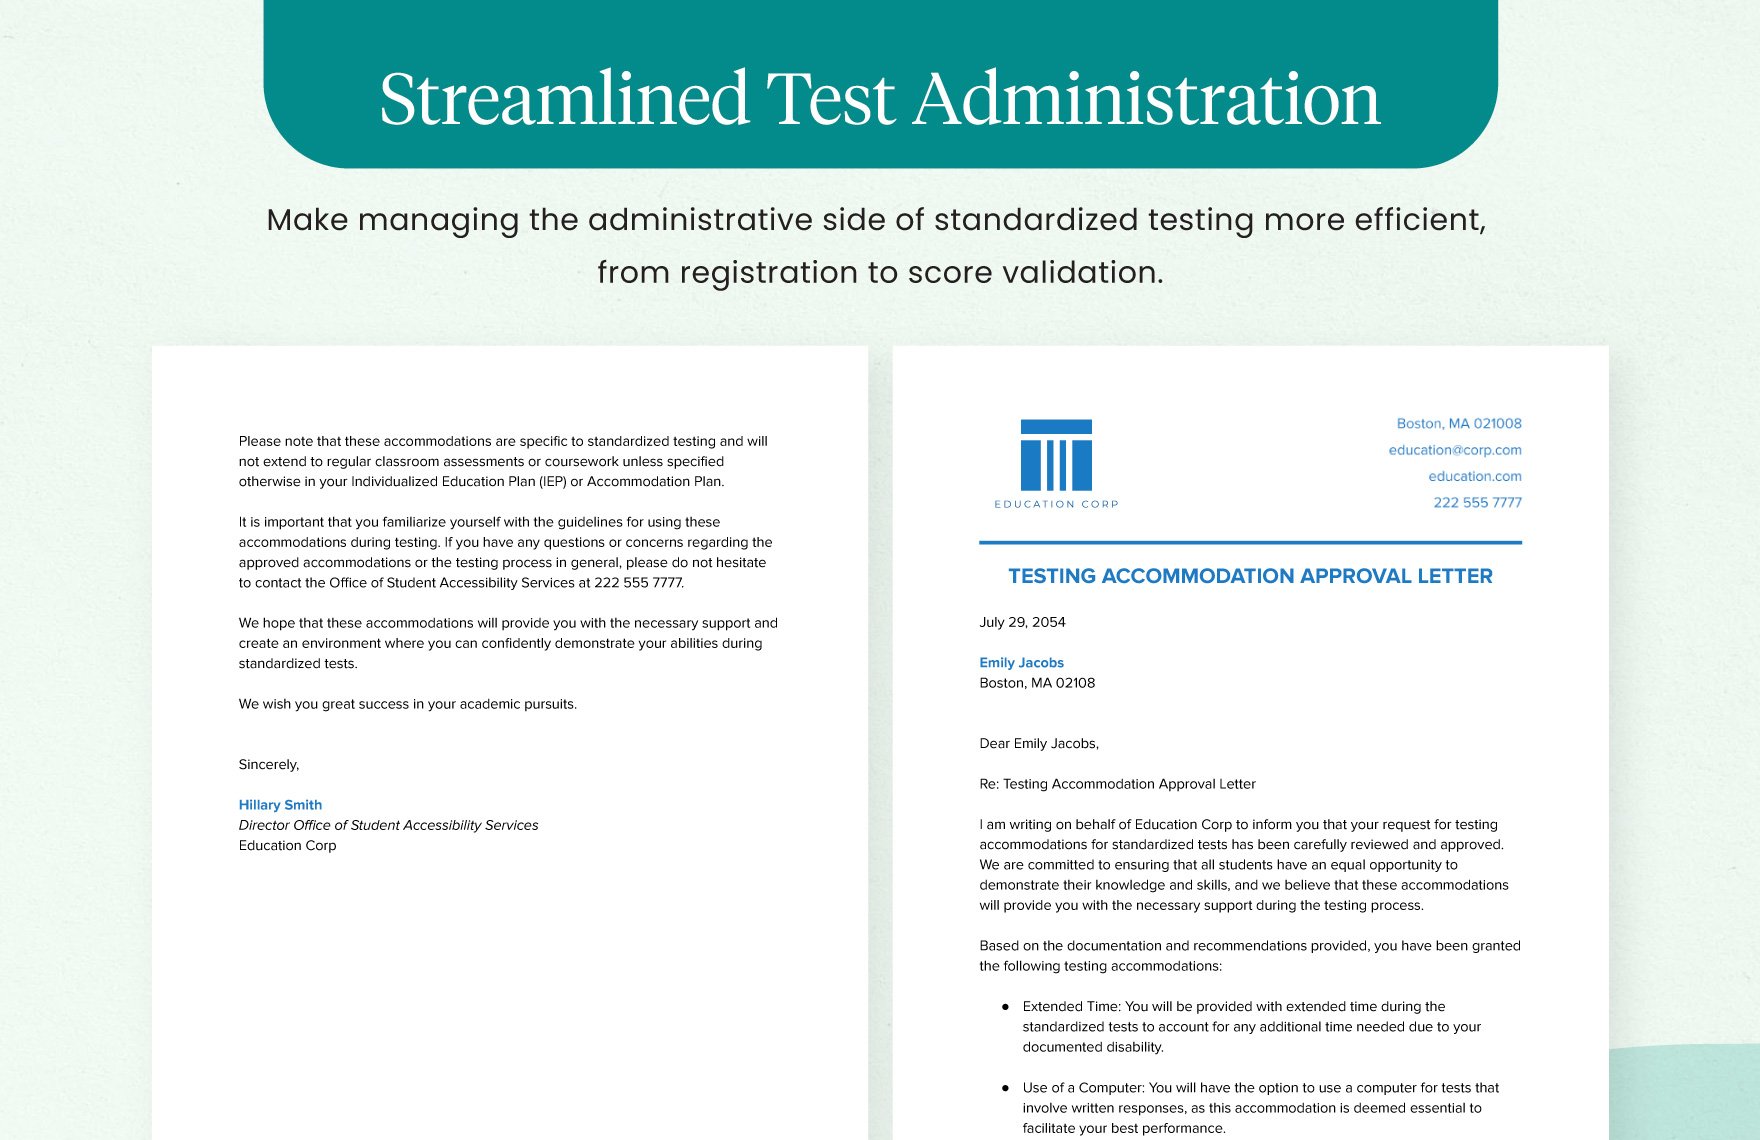 Testing Accommodation Approval Letter Template